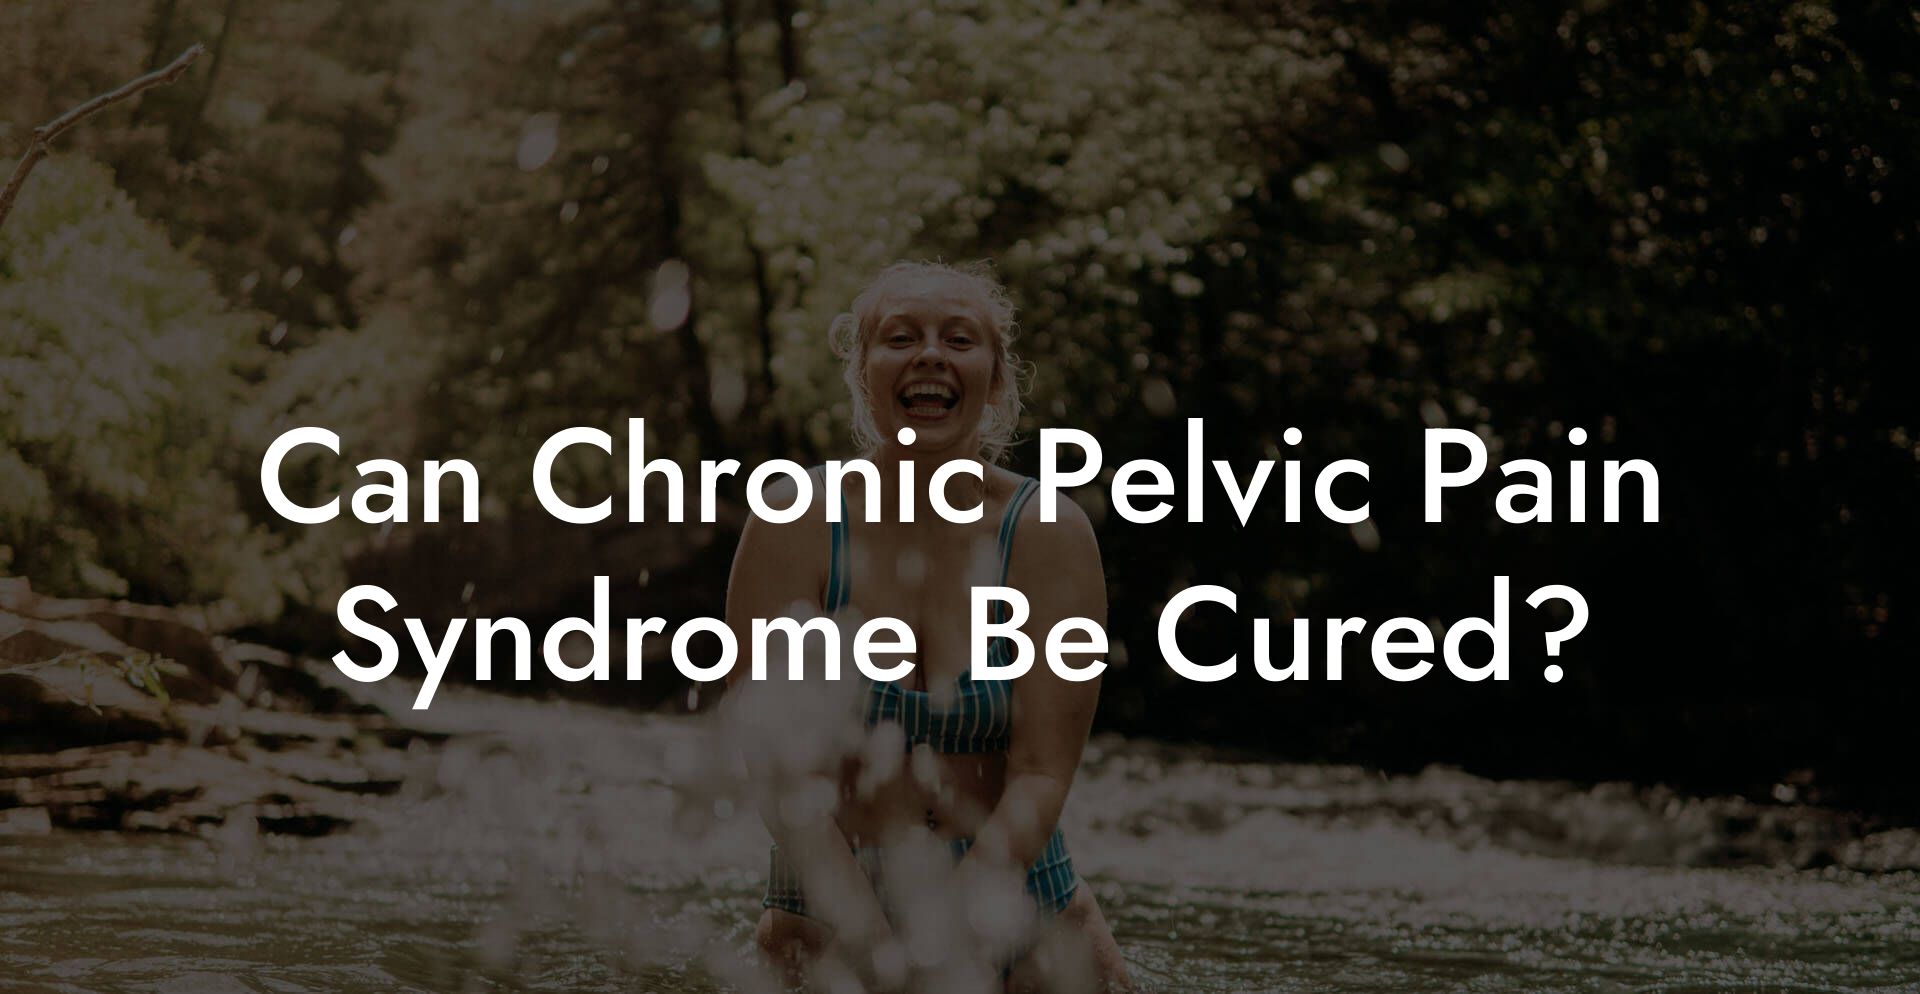 Can Chronic Pelvic Pain Syndrome Be Cured?